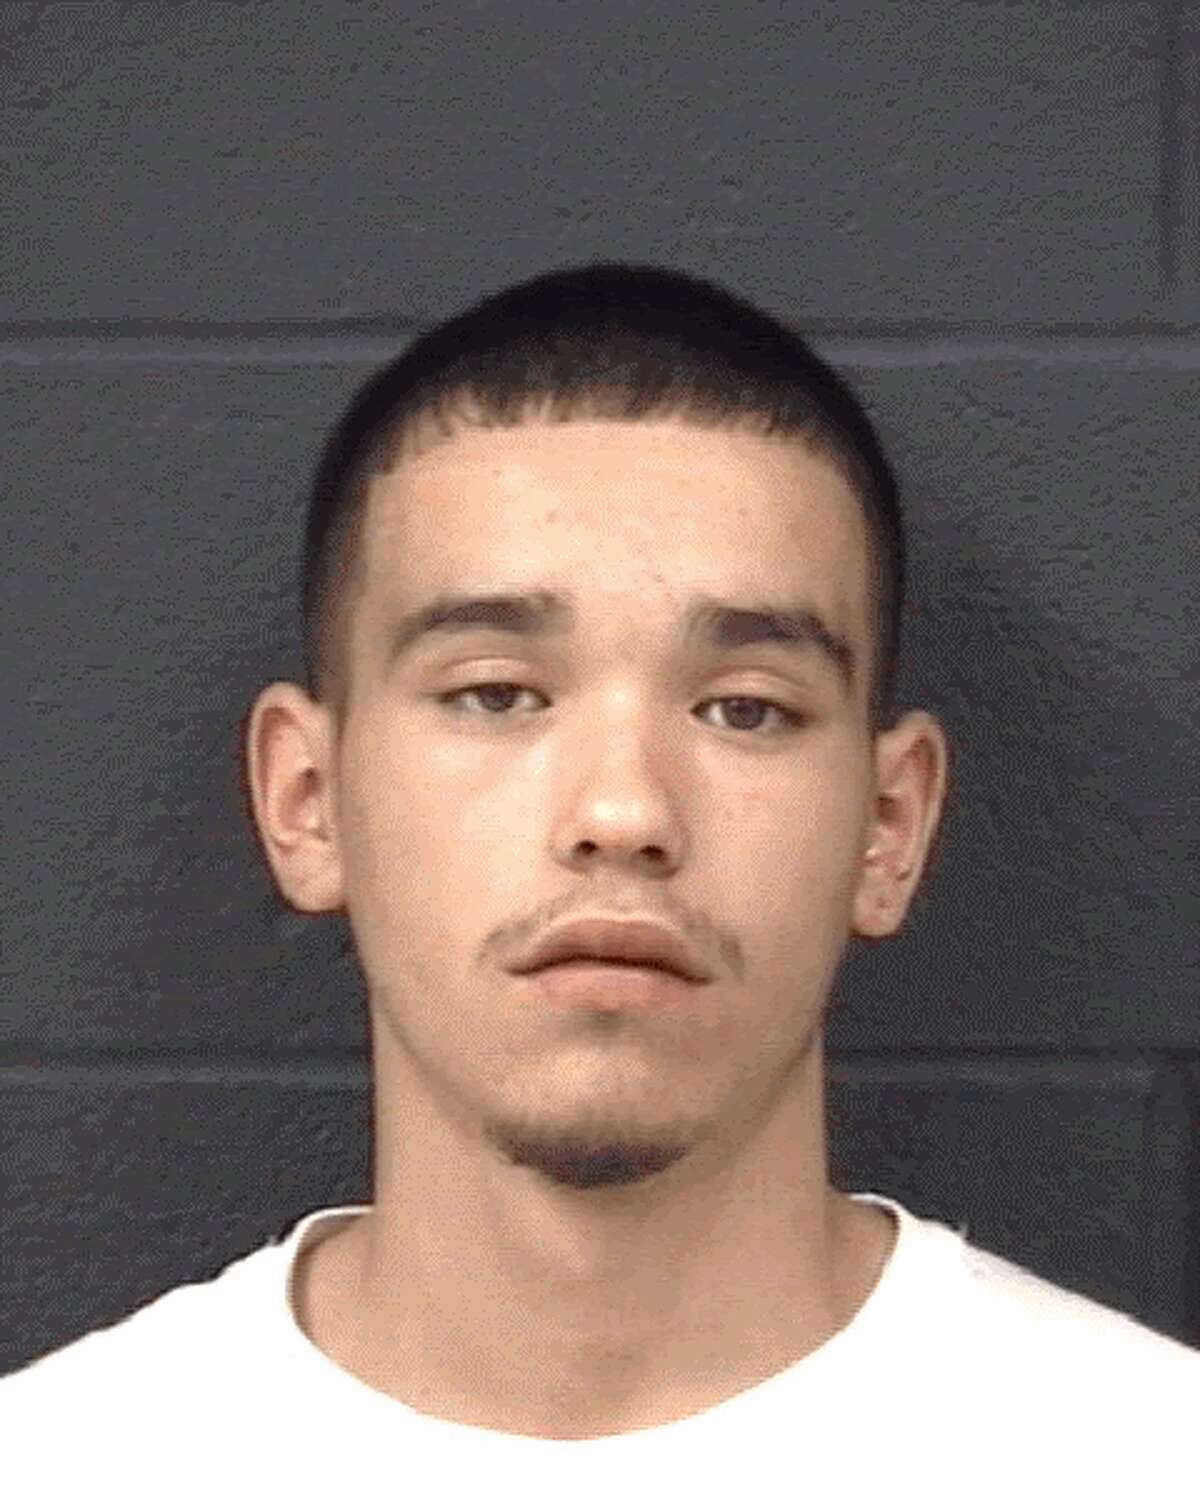 ALANIZ, ALFREDO (W M) (25) years of age was arrested on the charge of WARRANT ARREST   OUTSIDE AGENCY (M), at 2800 ZACATECAS ST, at 1314 hours on 1/3/2017